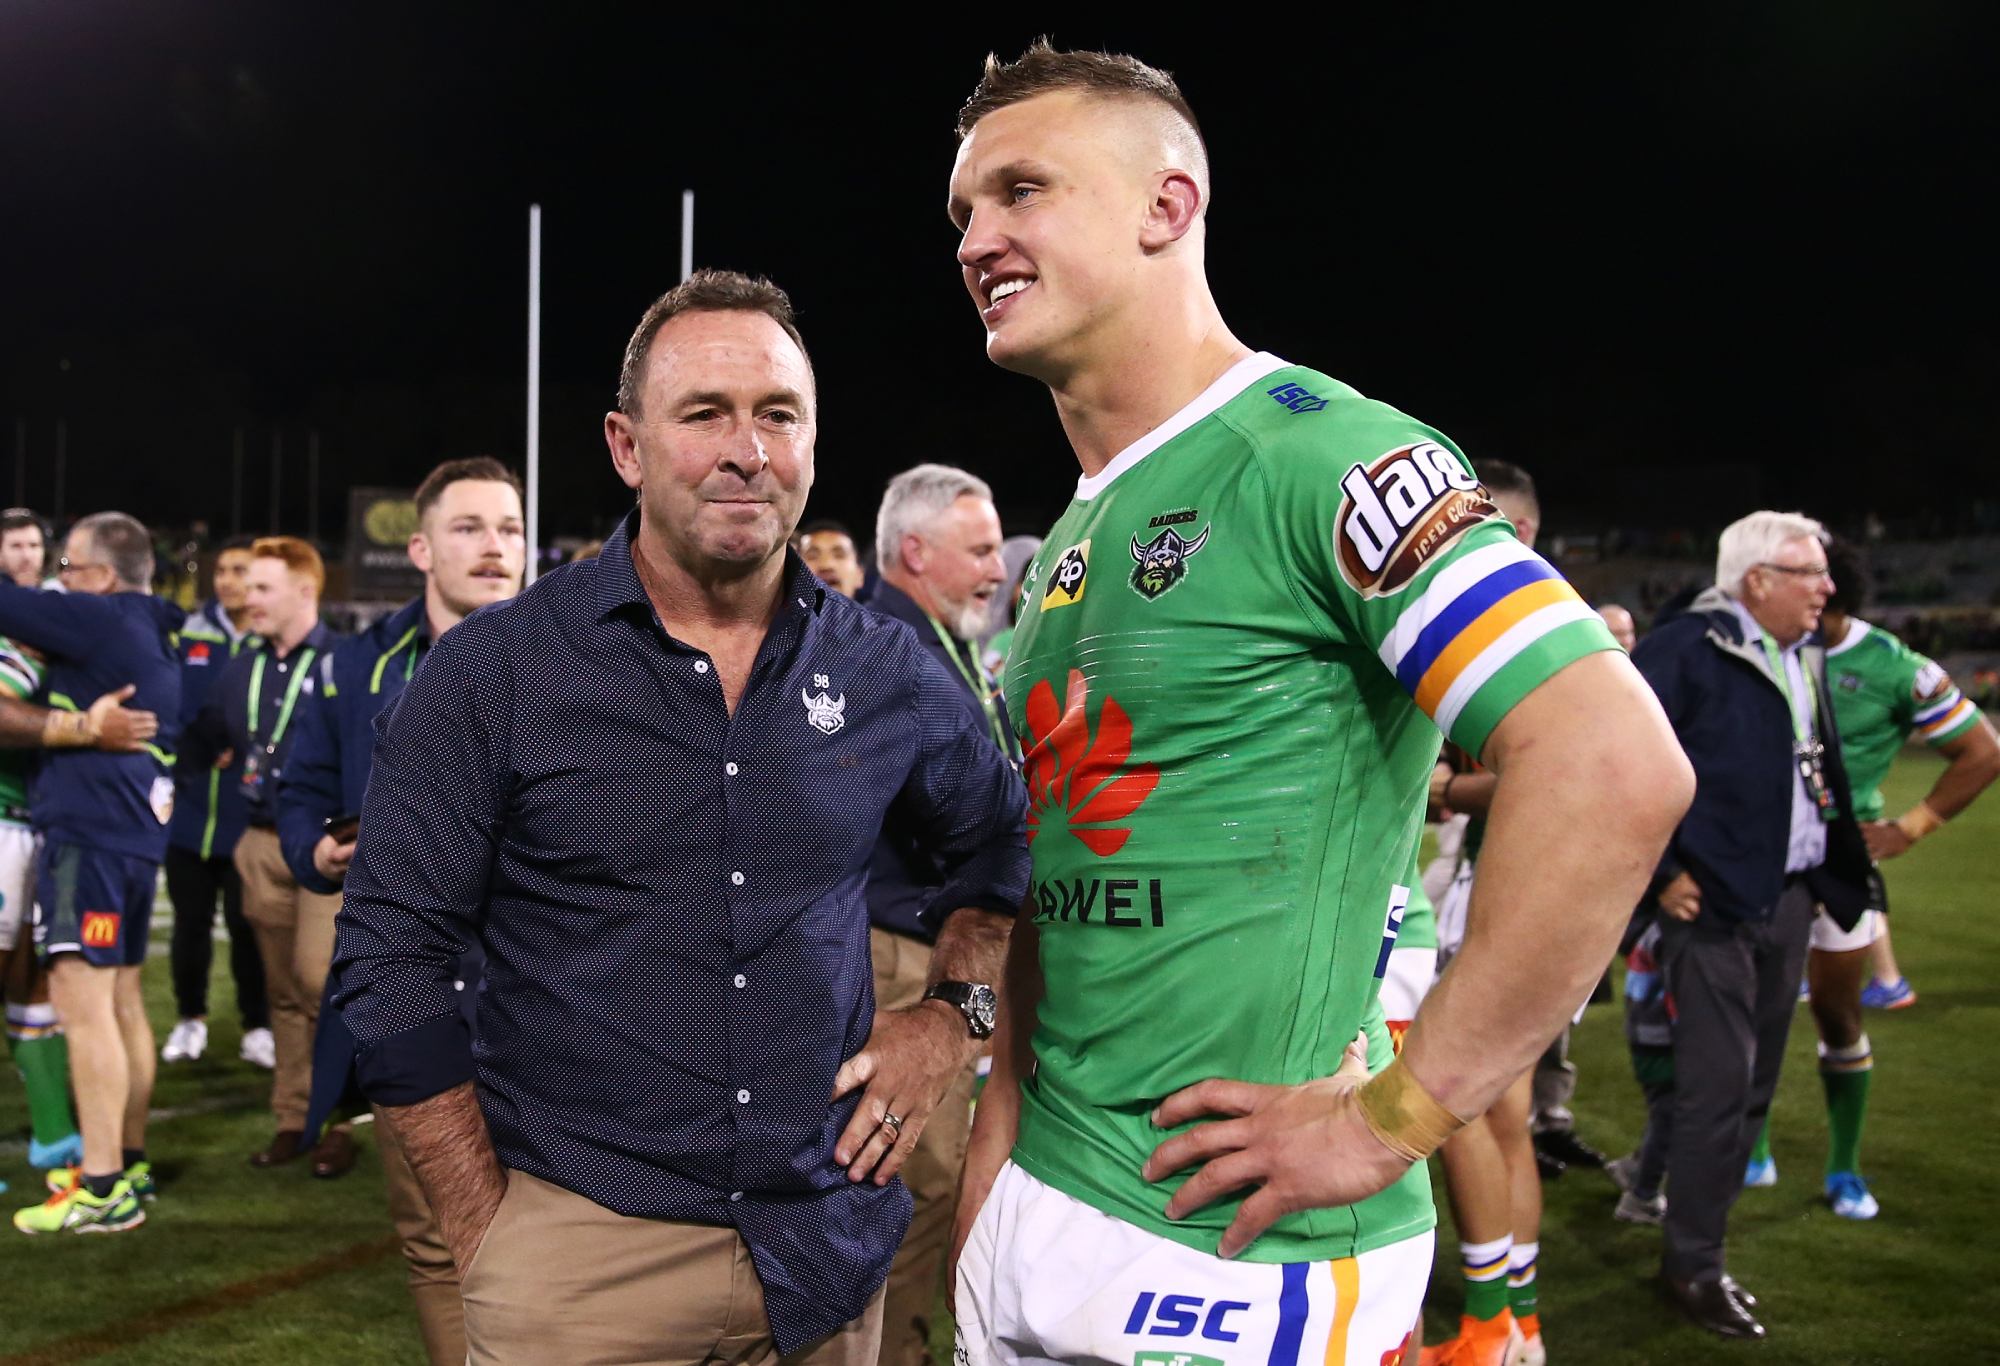 CANBERRA, AUSTRALIA - SEPTEMBER 27: Raiders coach, Ricky Stuart, talks with Jack Wighton of the Raiders after the NRL Preliminary Final match between the Canberra Raiders and South Sydney Rabbitohs at GIO Stadium on September 27, 2019 in Canberra, Australia.  (Photo by Brendan Thorne / Getty Images)